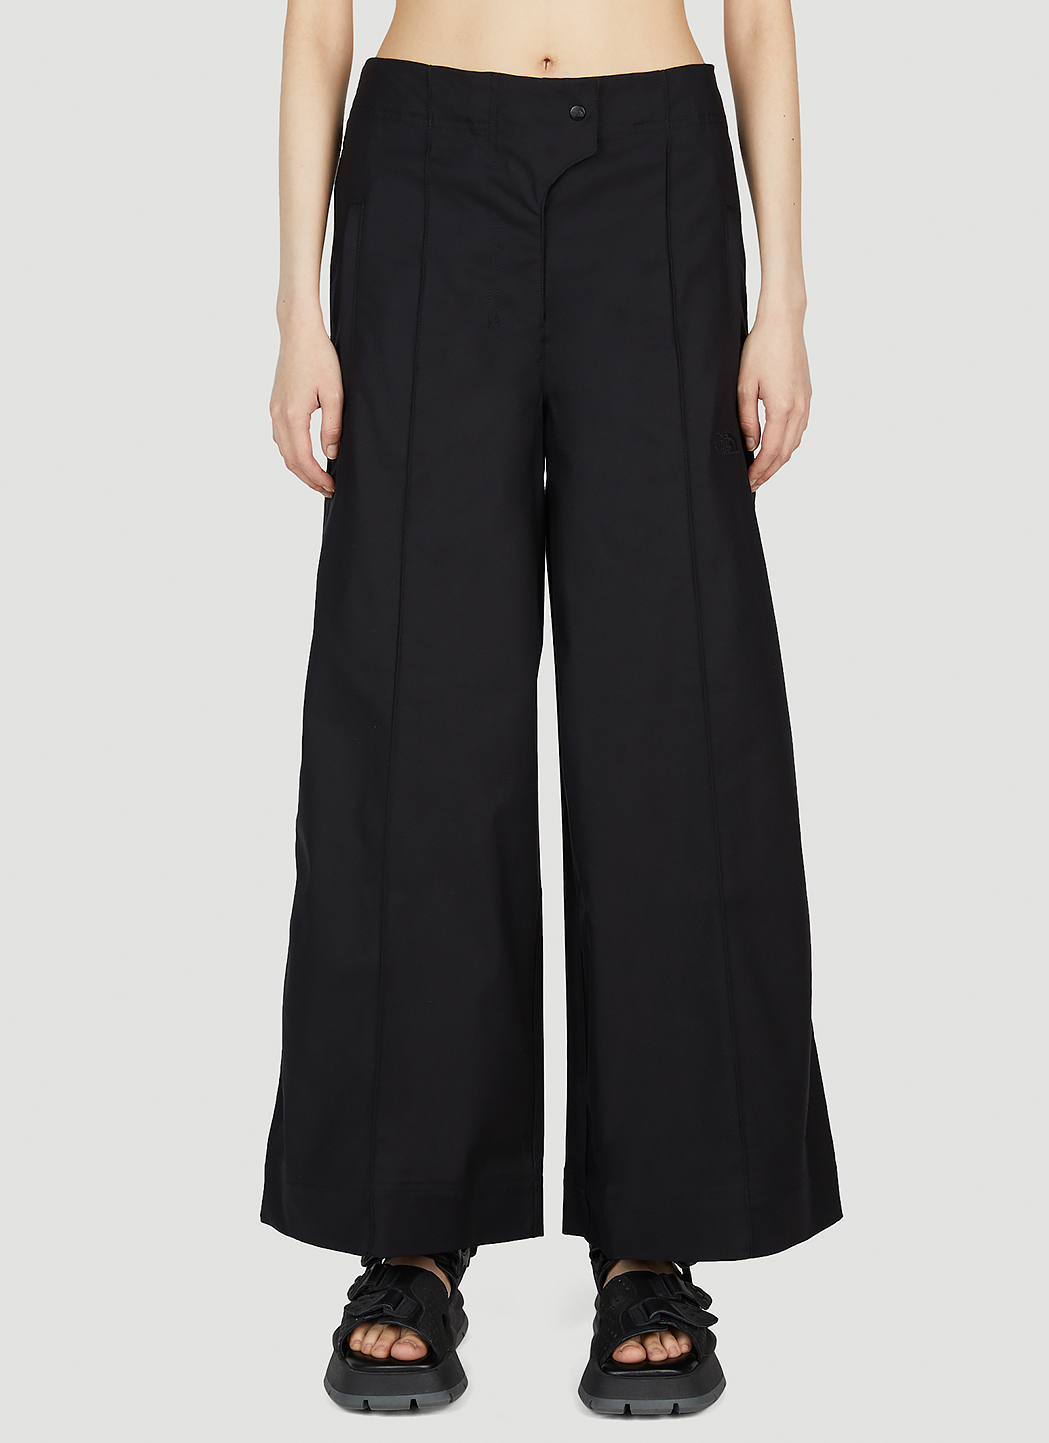 The North Face Black Series Wide Pants